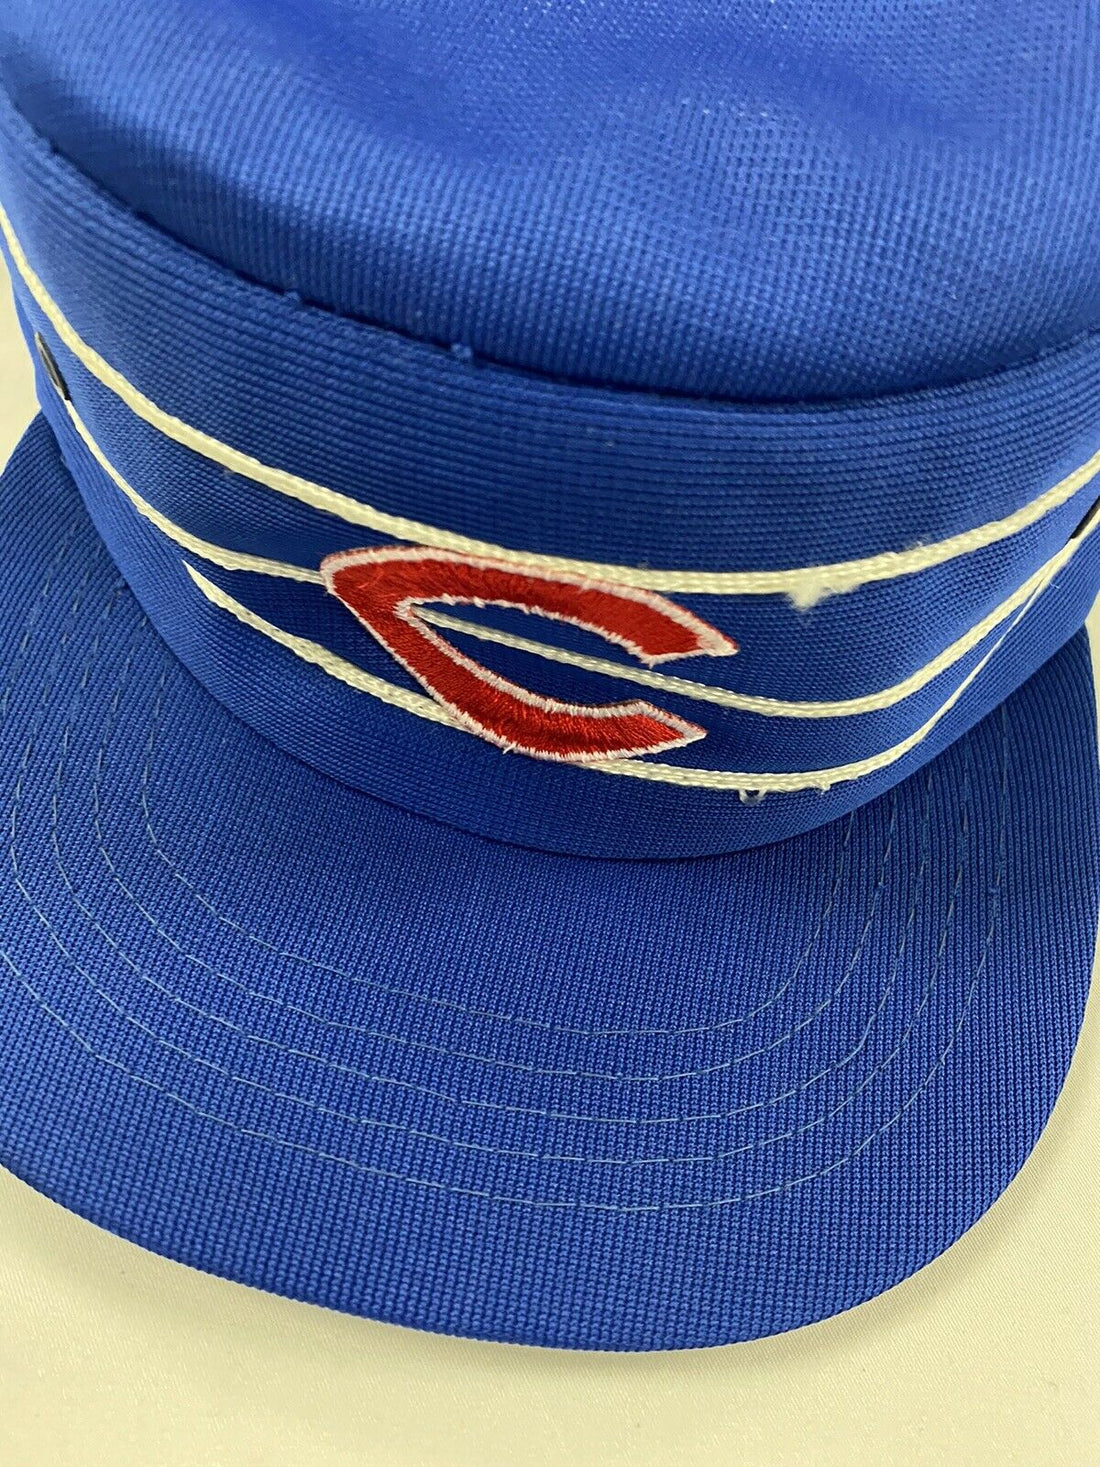 Vintage Chicago Cubs Pillbox Snapback Hat Cap OSFA 70s 80s MLB Young An